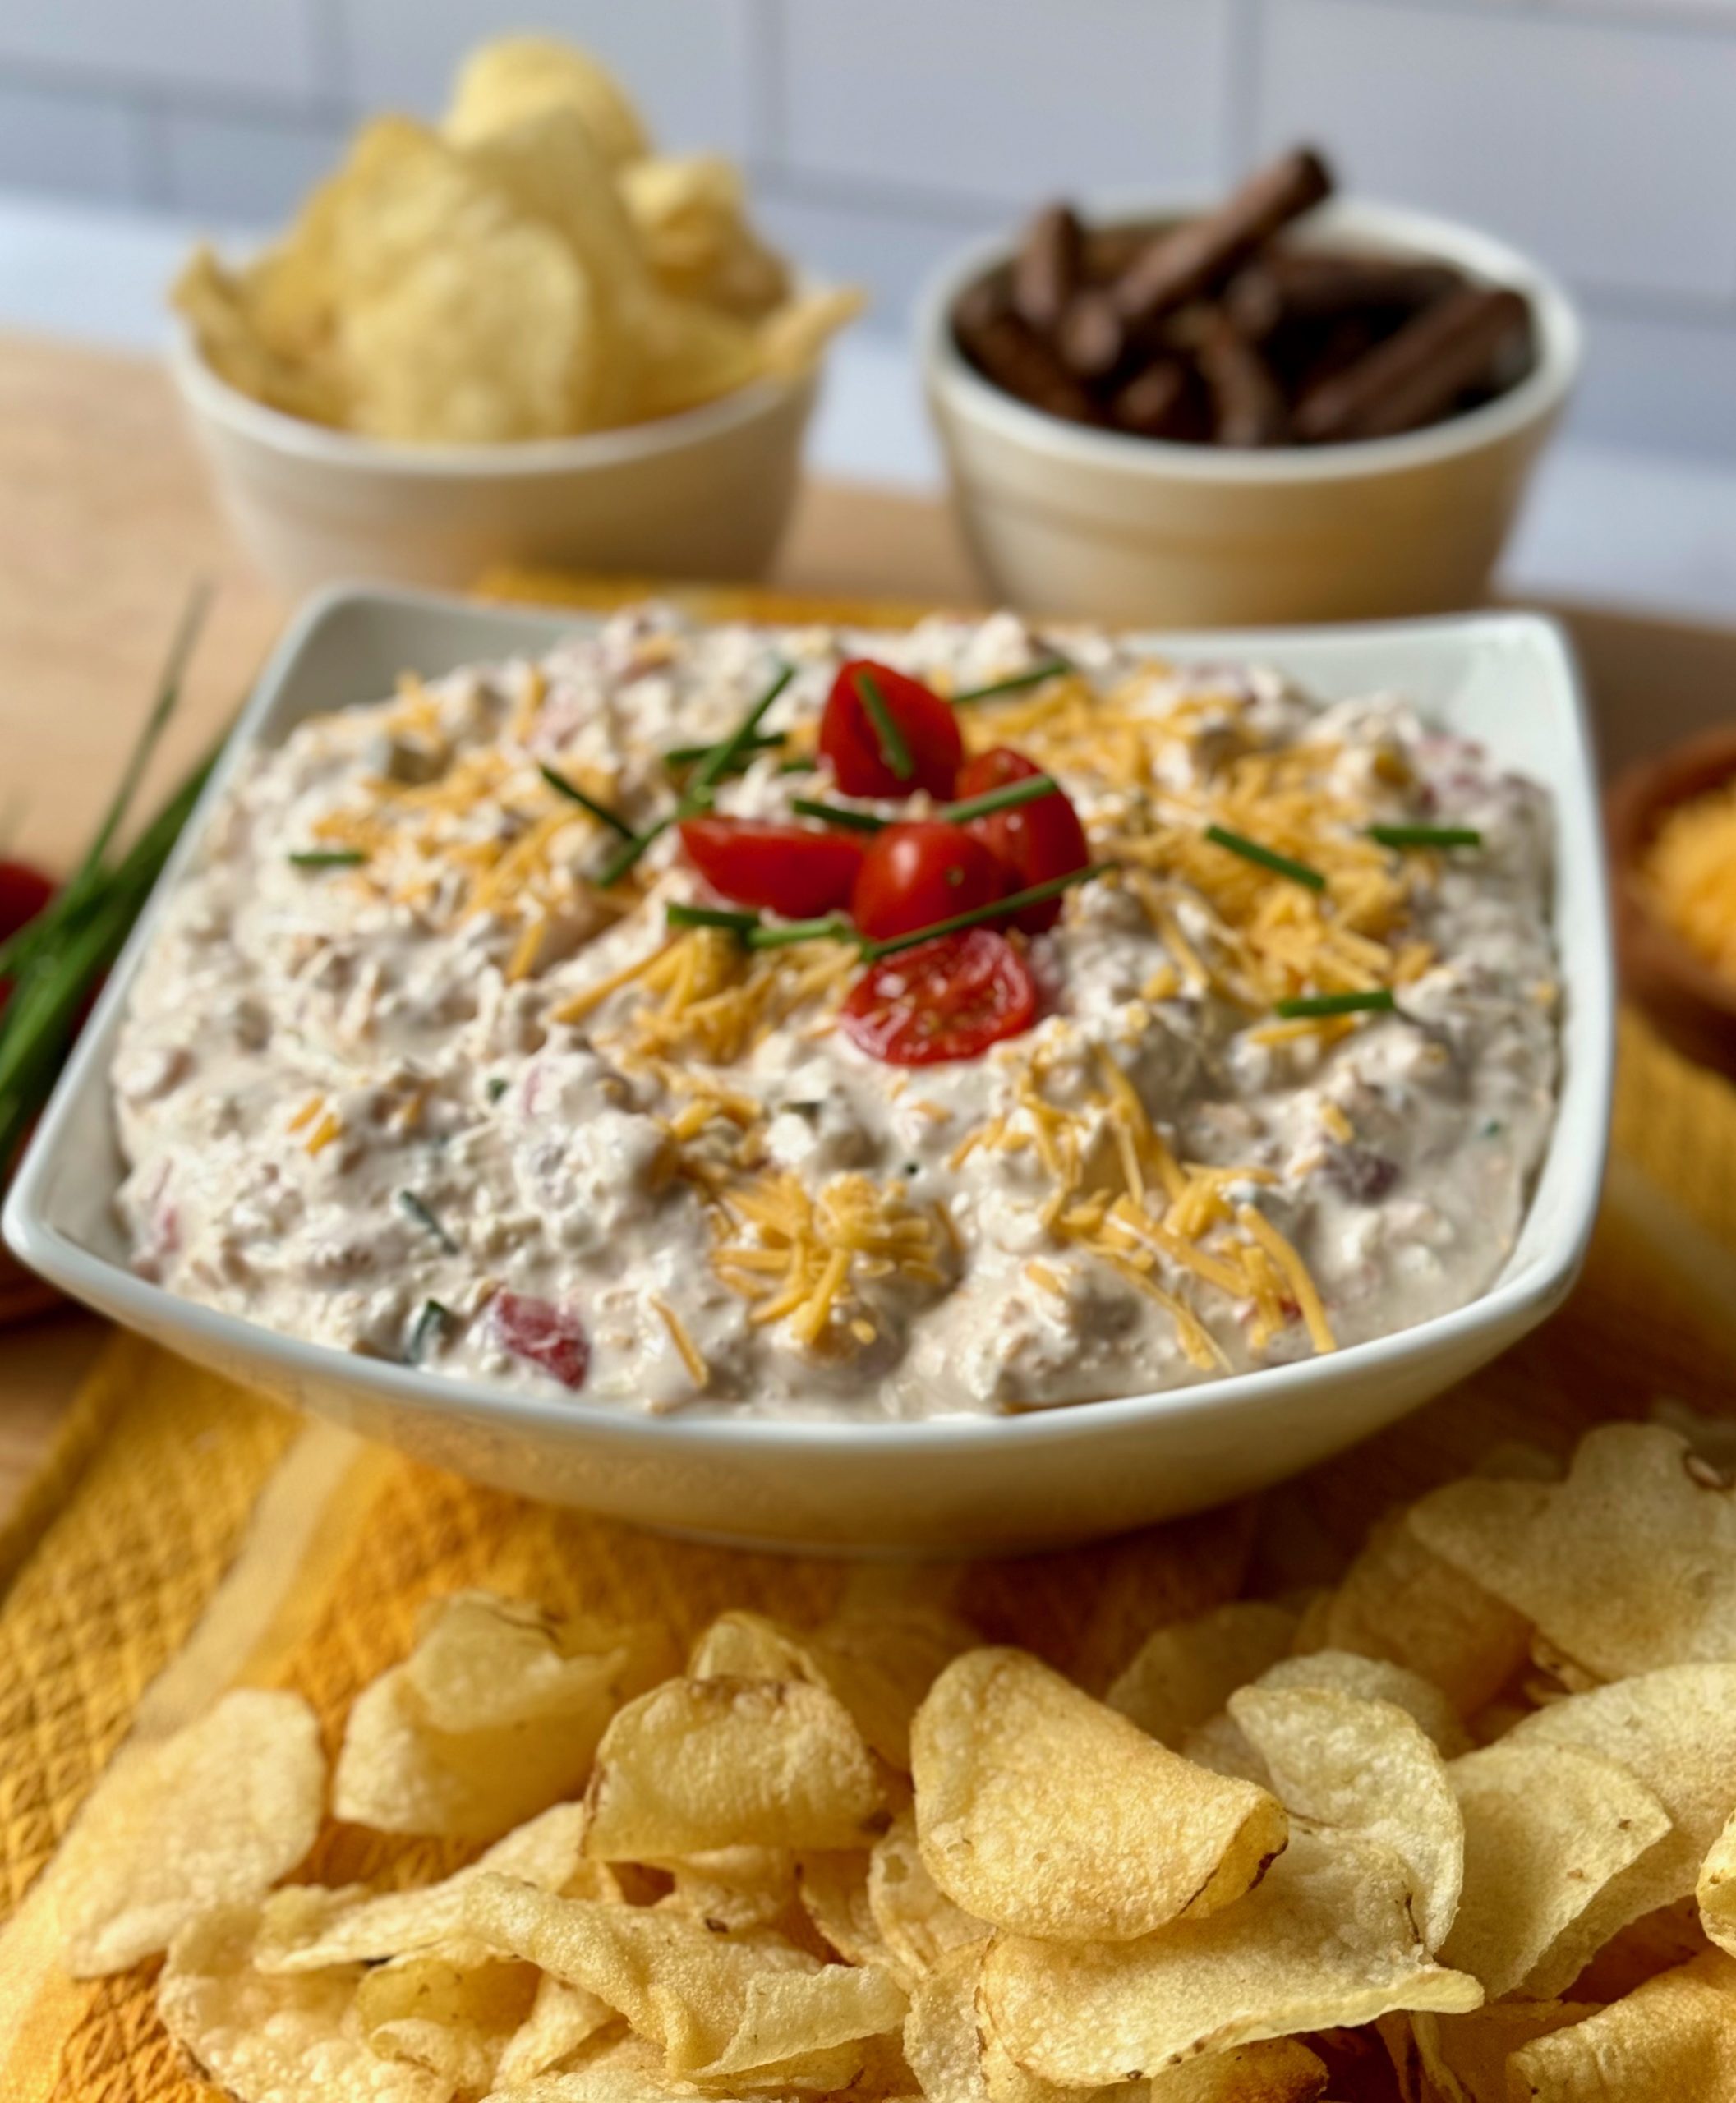 Vertical recipe photo of Sink the Boat Dip. Sloped white rectangular bowl in center with dip, creamy white dip topped with shredded yellow cheddar, halved grape tomatoes and snipped chives. Surrounding the dip are potato chips and pumpernickel sticks. The backsplash is white subway tile.